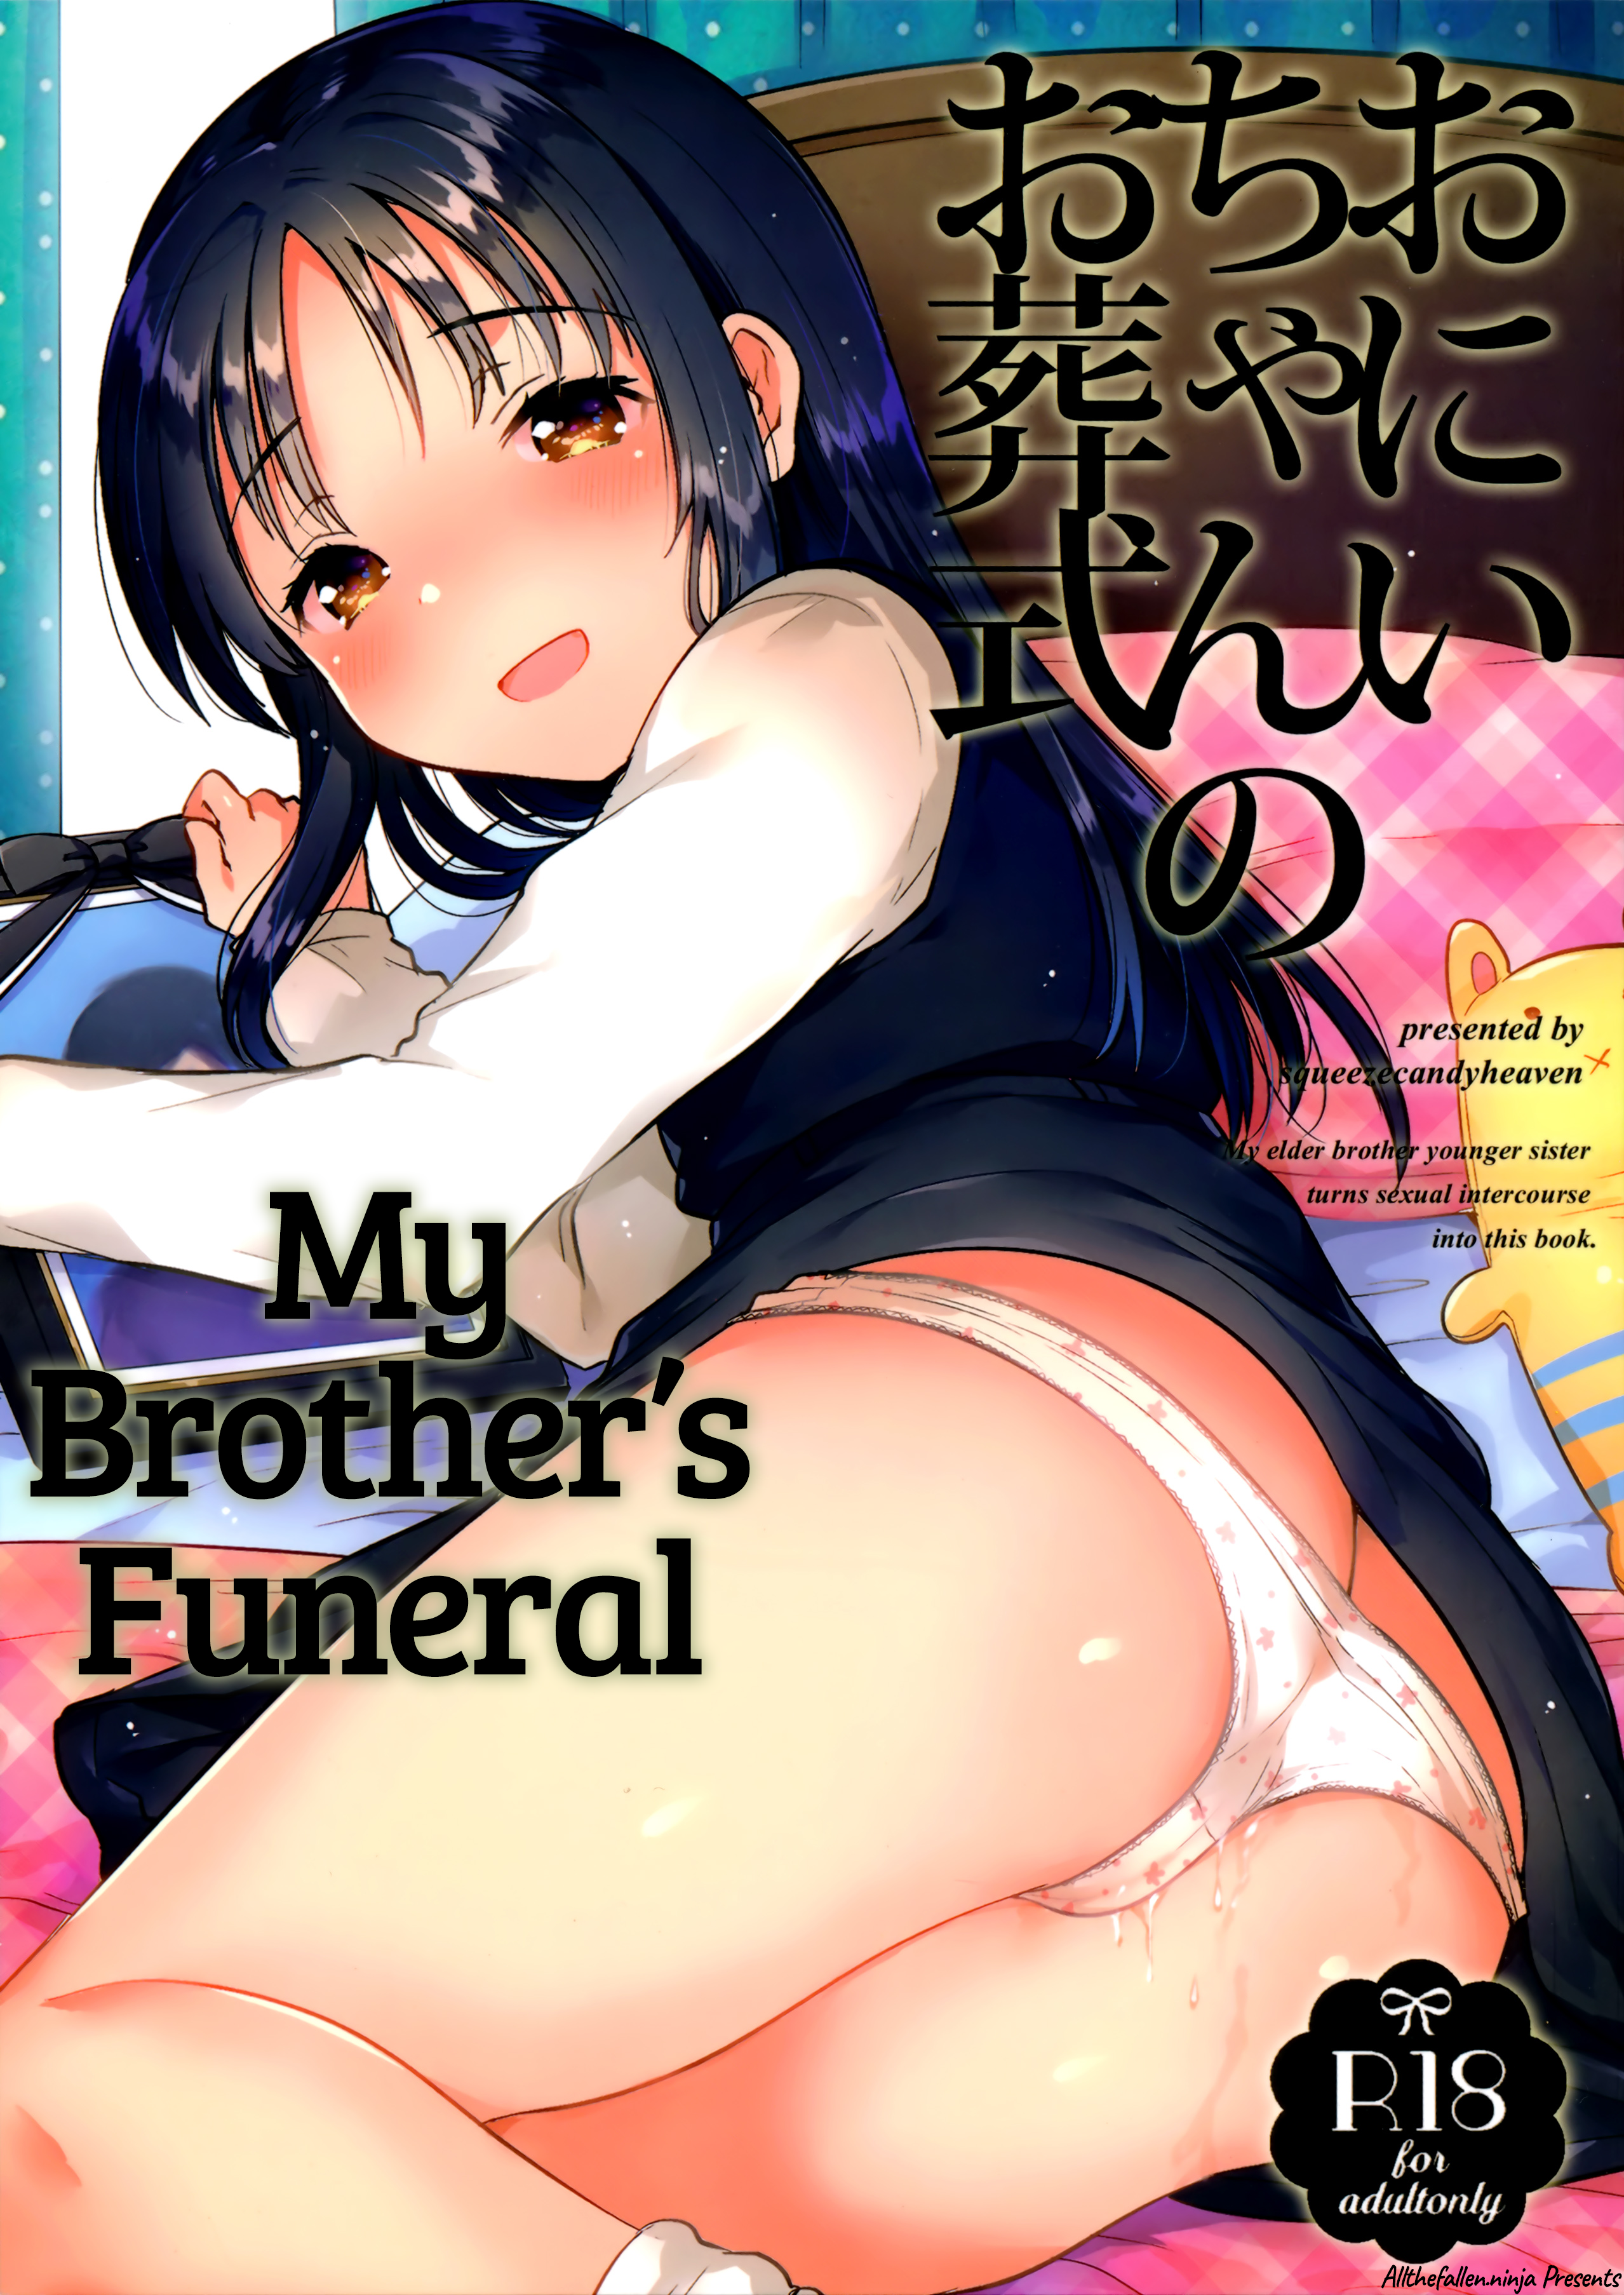 Onii-chan no Osoushiki | My Brother’s Funeral